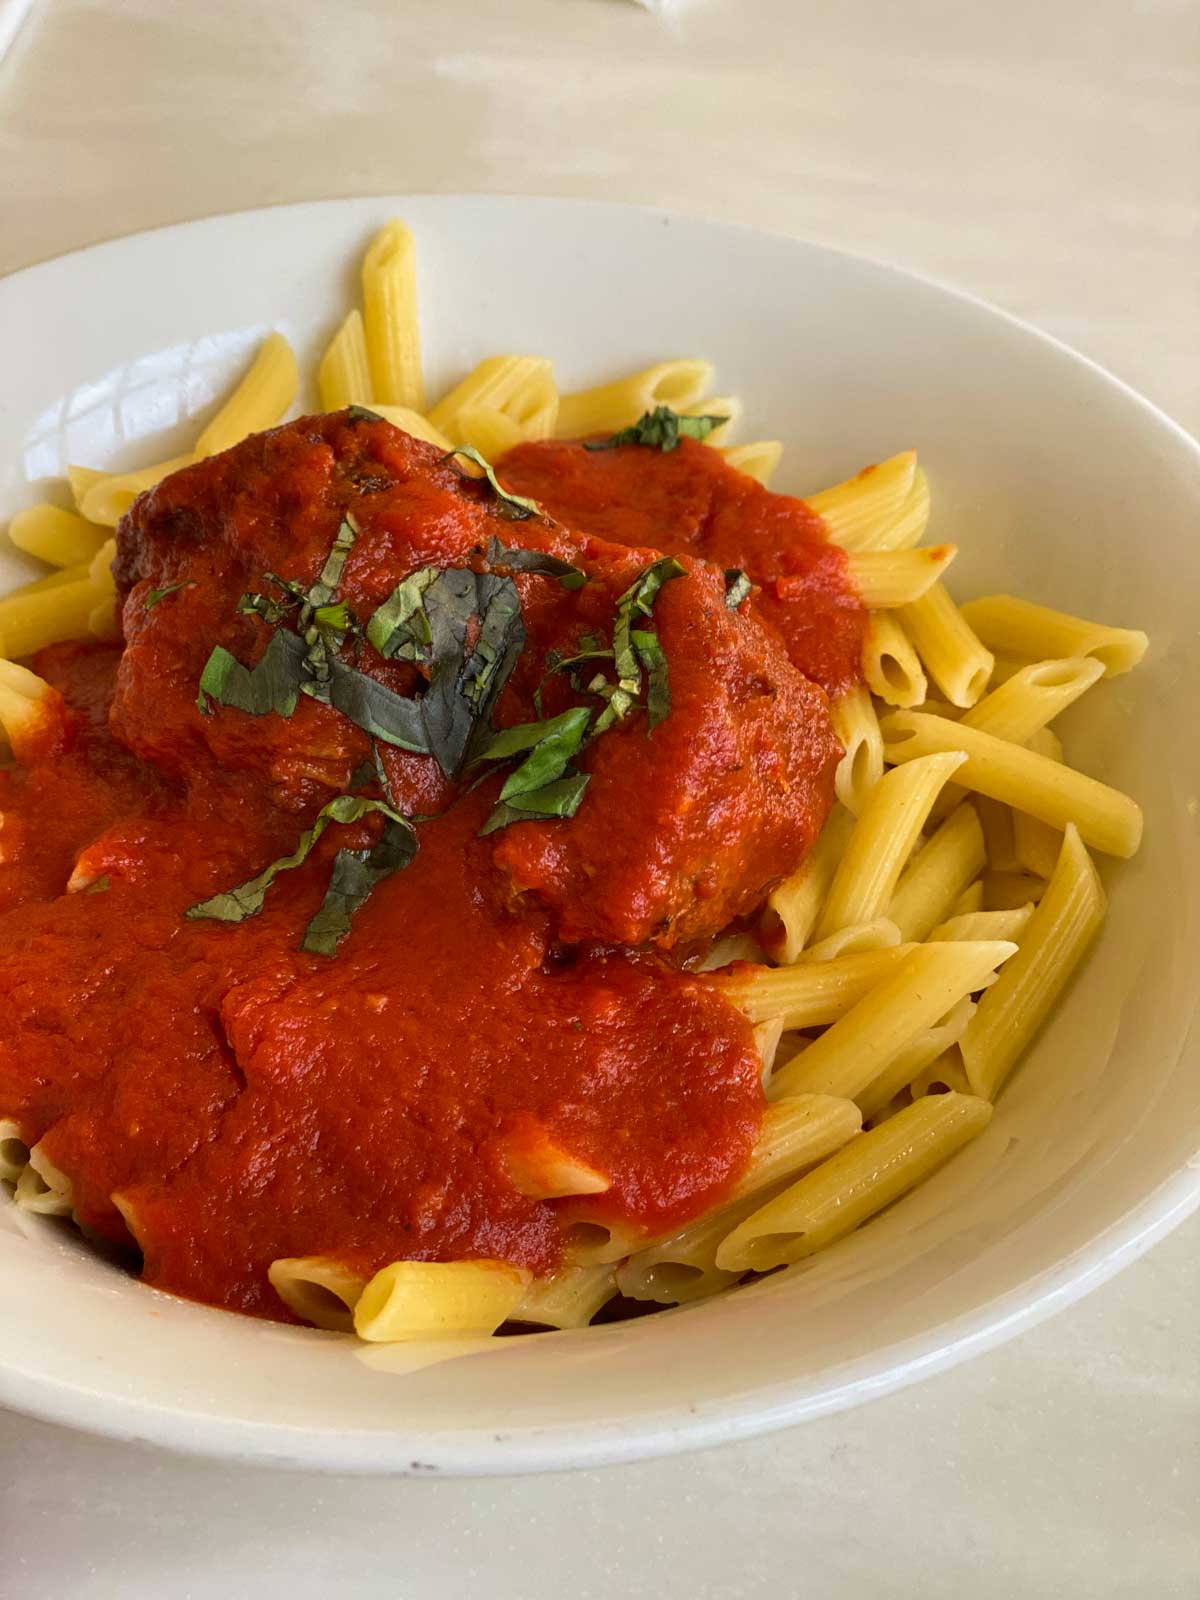 The classic Italian pasta can be substituted for the penne in this photo.